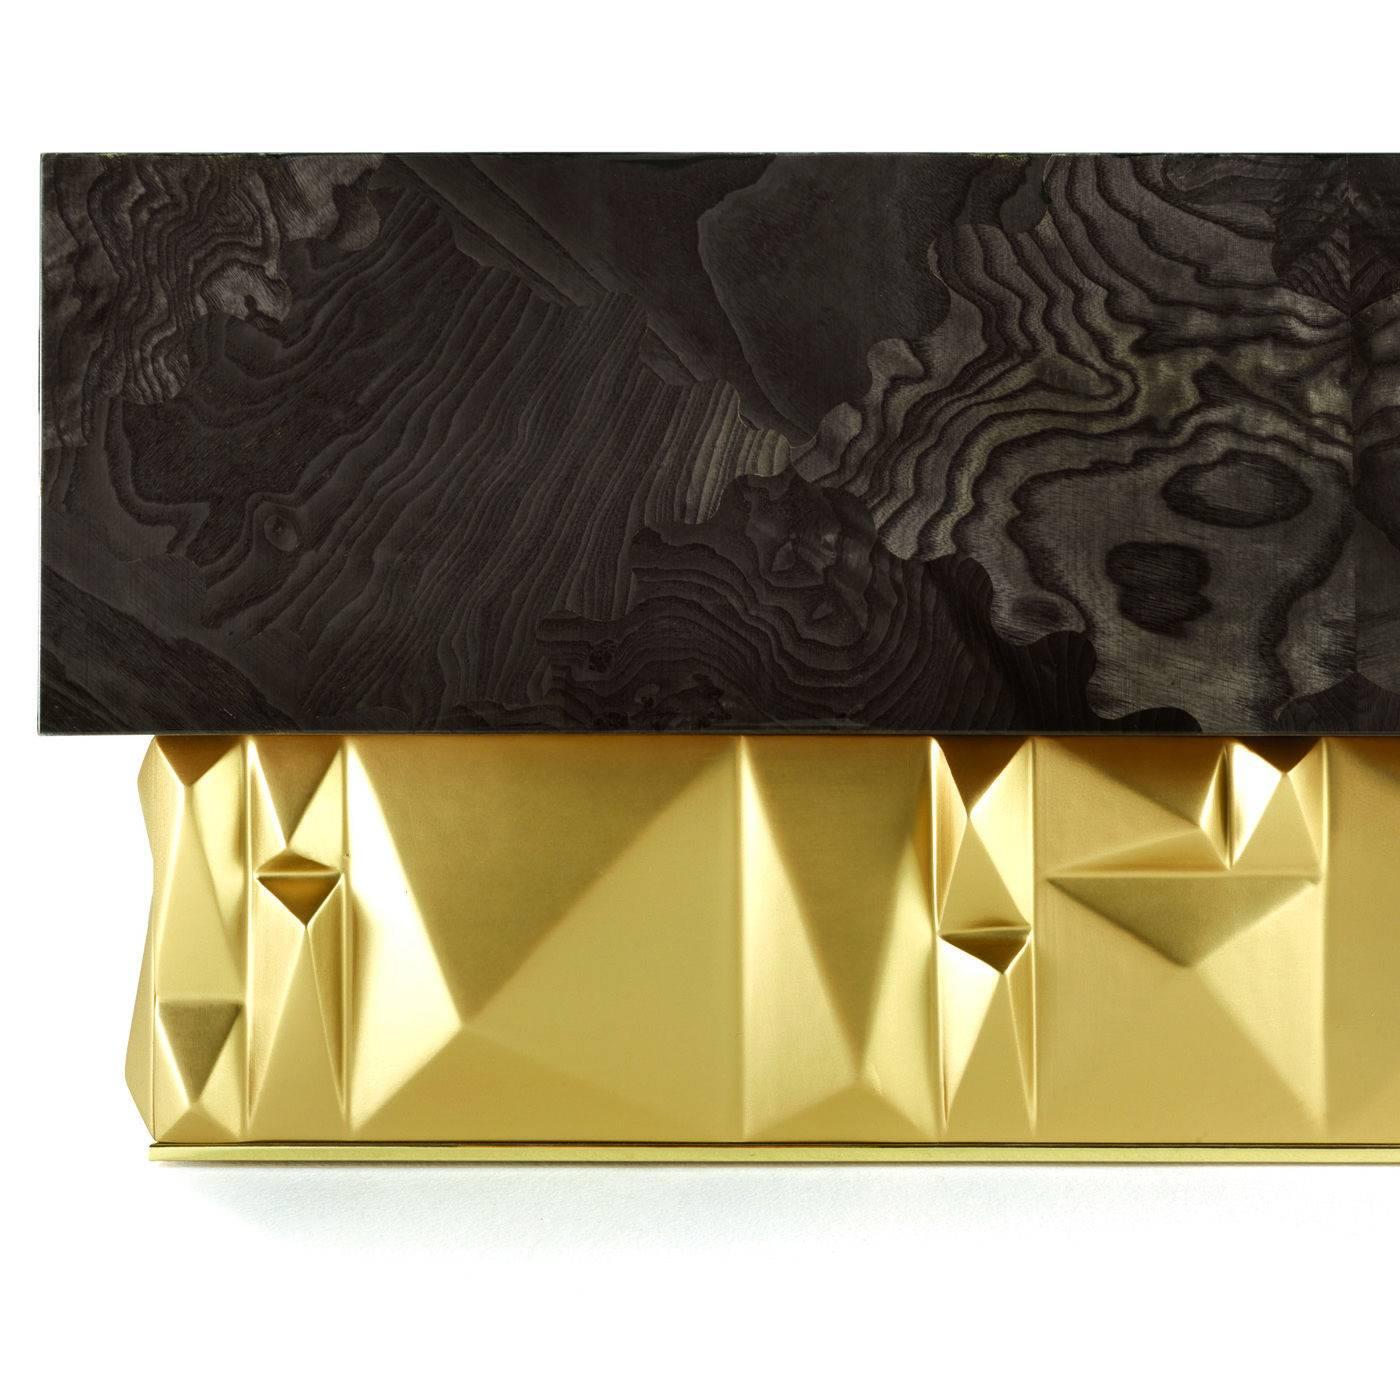 This striking coffee table is part of the Ulysse collection, designed by the creative duo Alex-Charles. The eccentric base, with its satin effect natural brass finish, features geometrical 3D decorations recalling the ashlar blocks and creating a